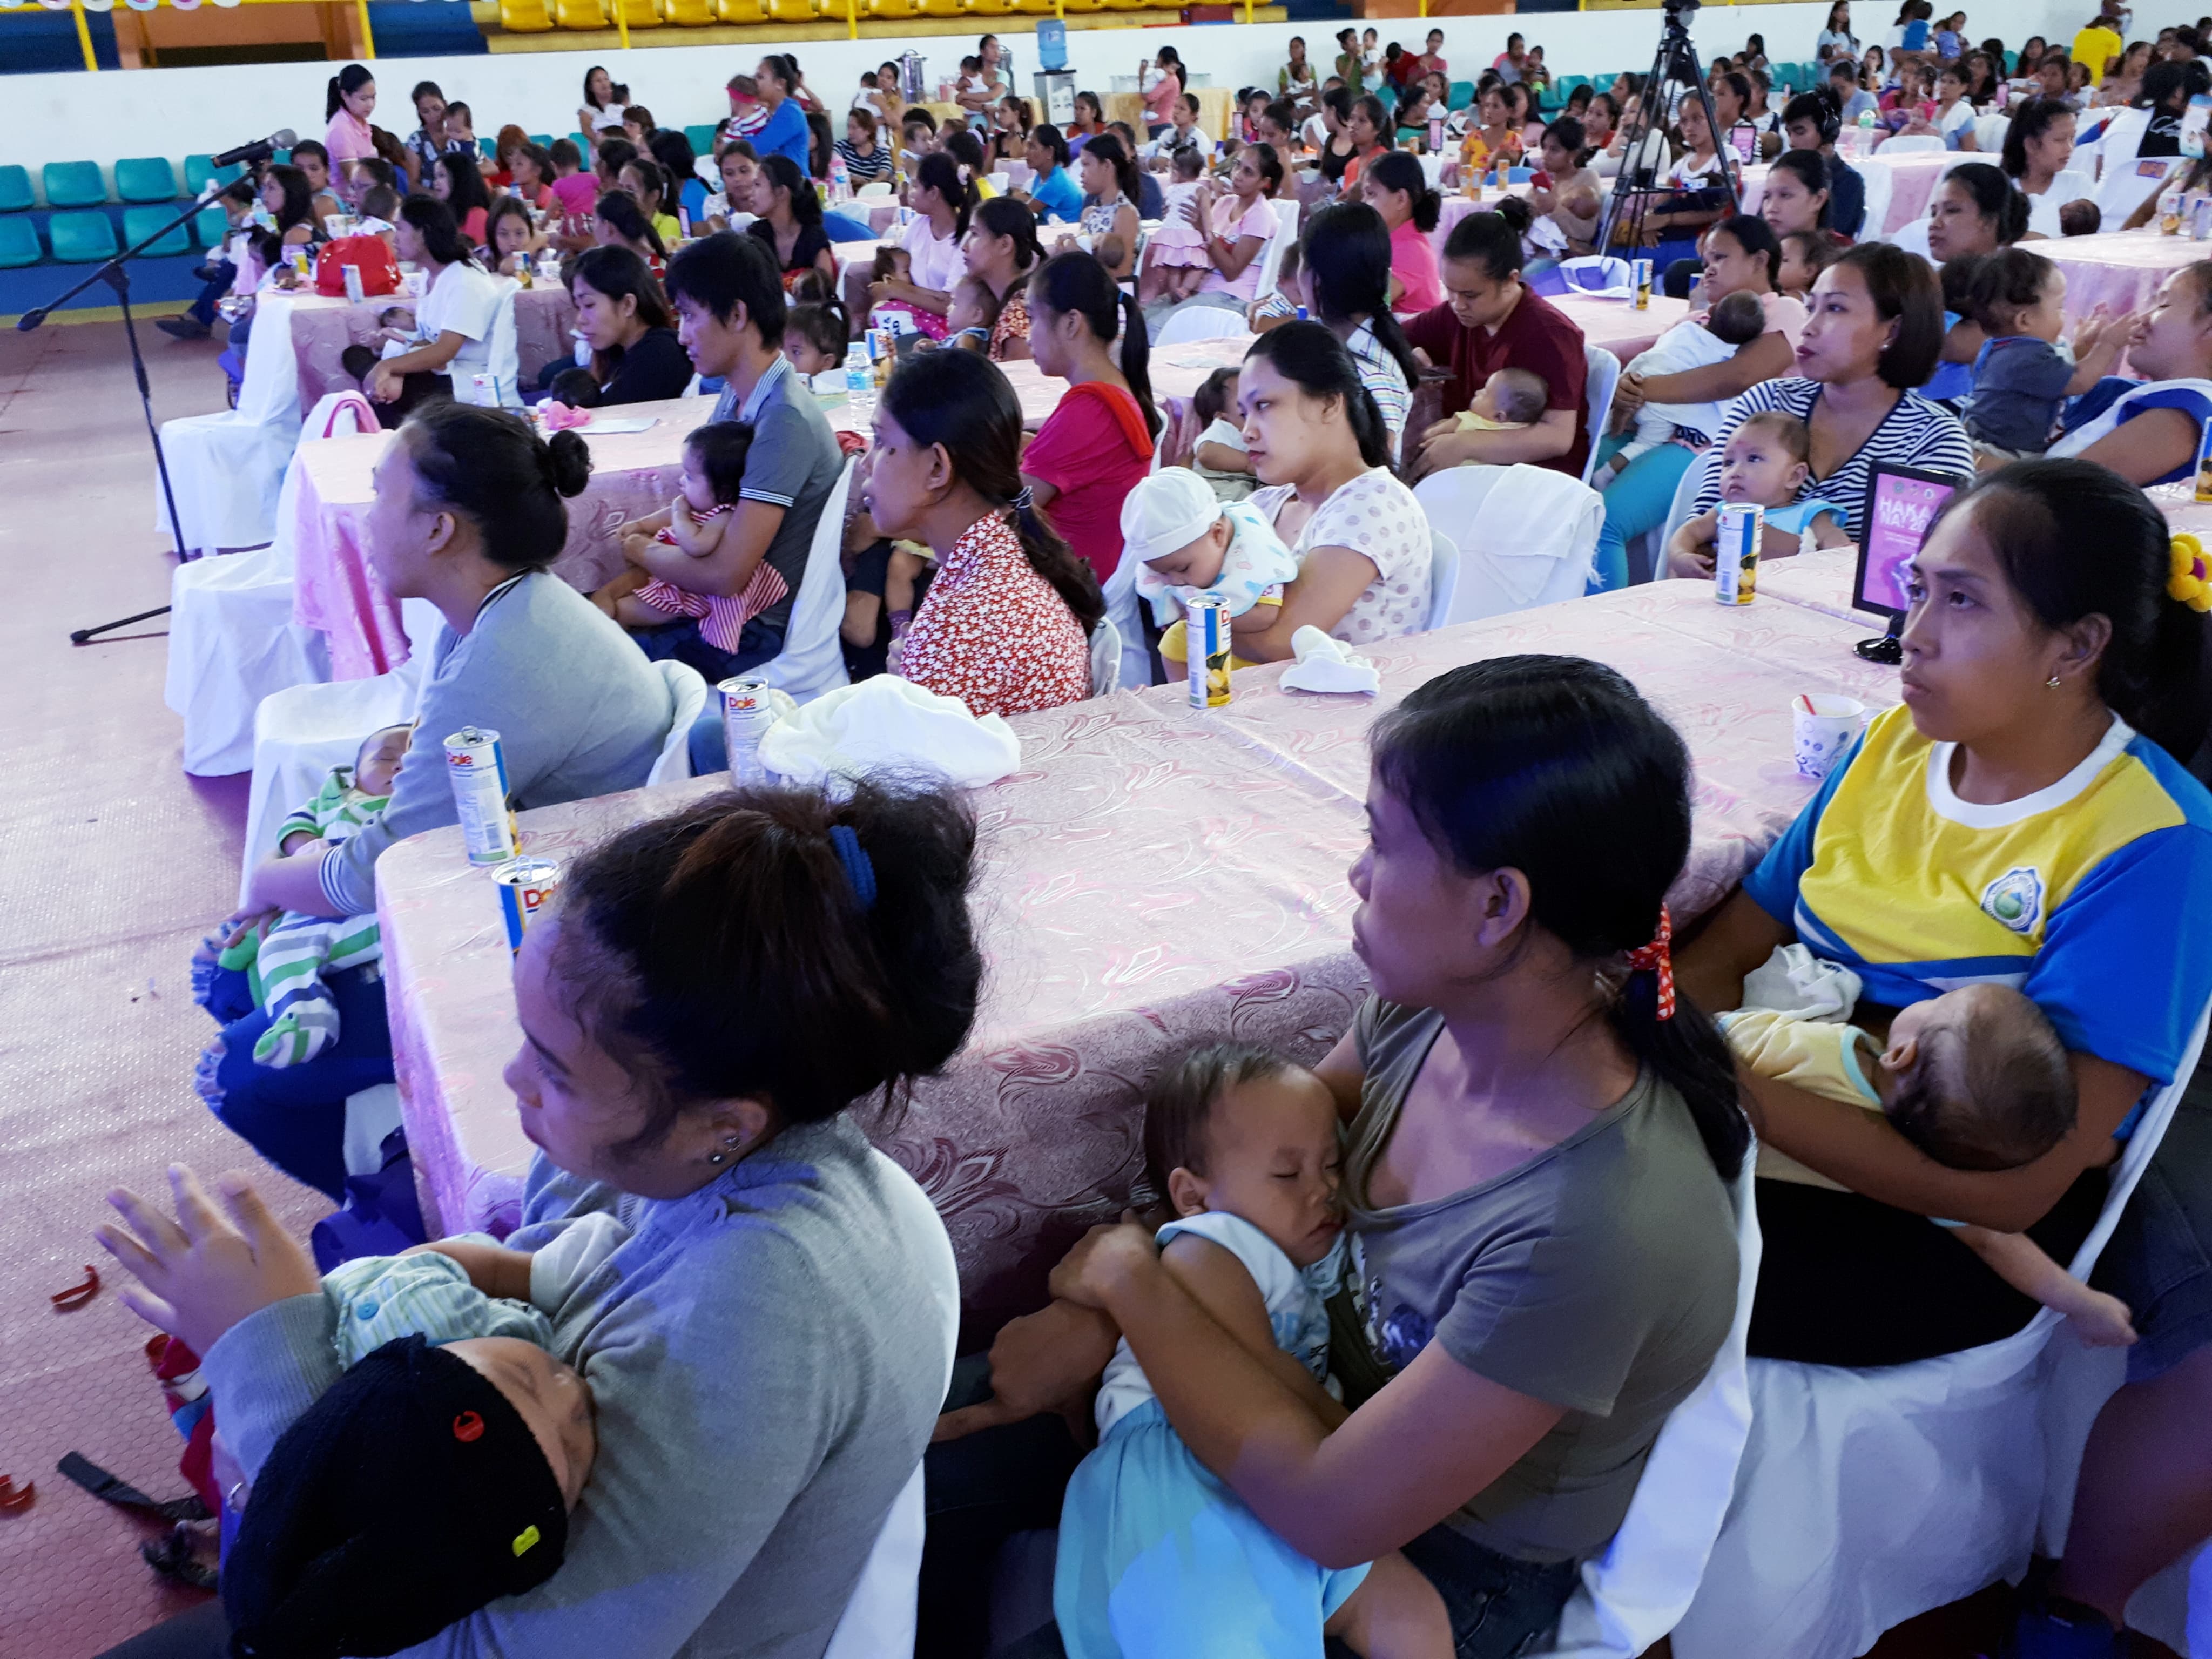 500 mothers simultaneously breastfeed babies in Albay event